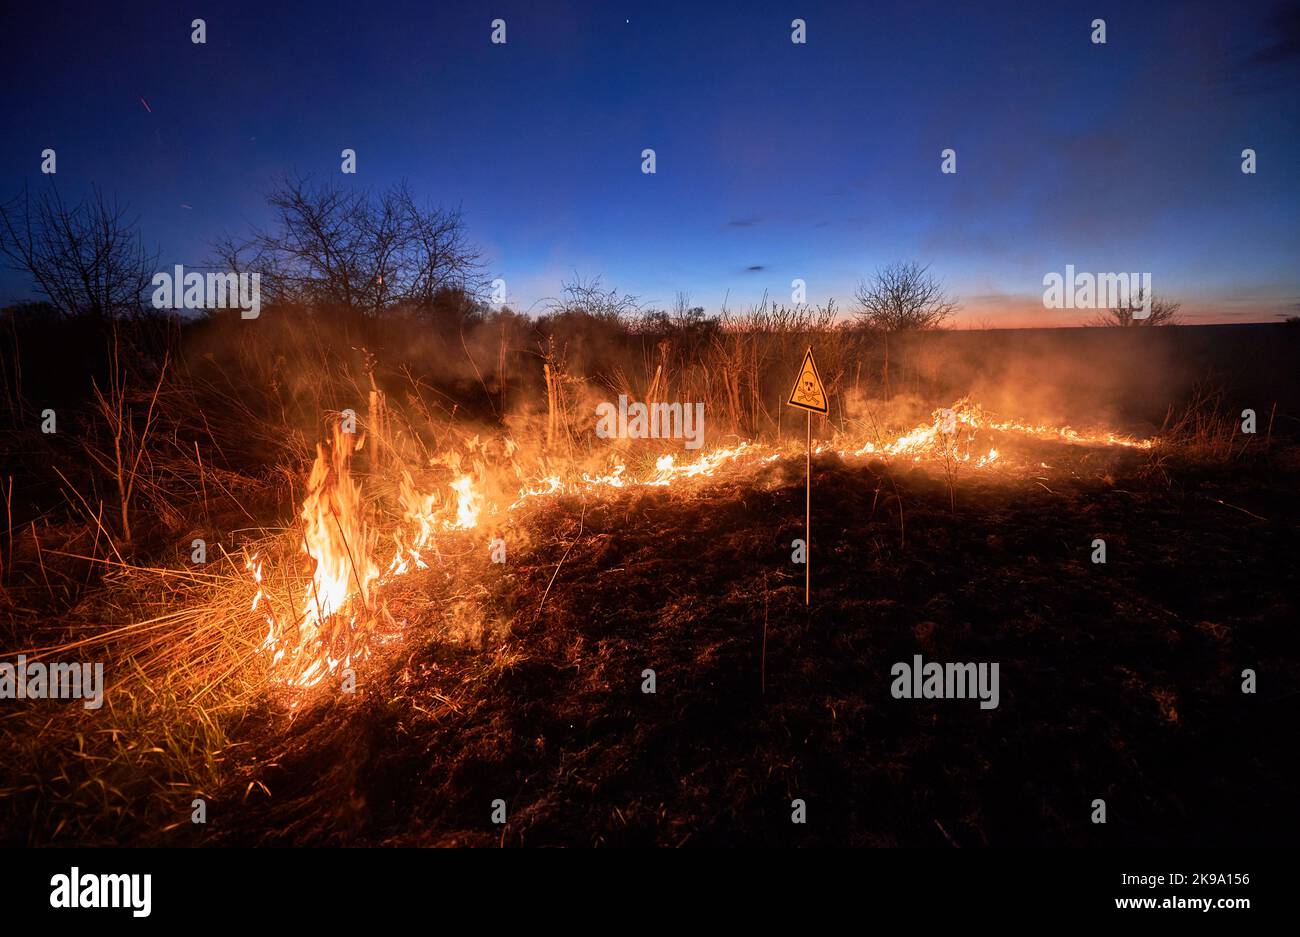 Burning dry grass and poison toxic sign at night. Triangle with skull and crossbones sign warning about poisonous substances and danger in field with fire. Ecology, hazard, natural disaster concept. Stock Photo